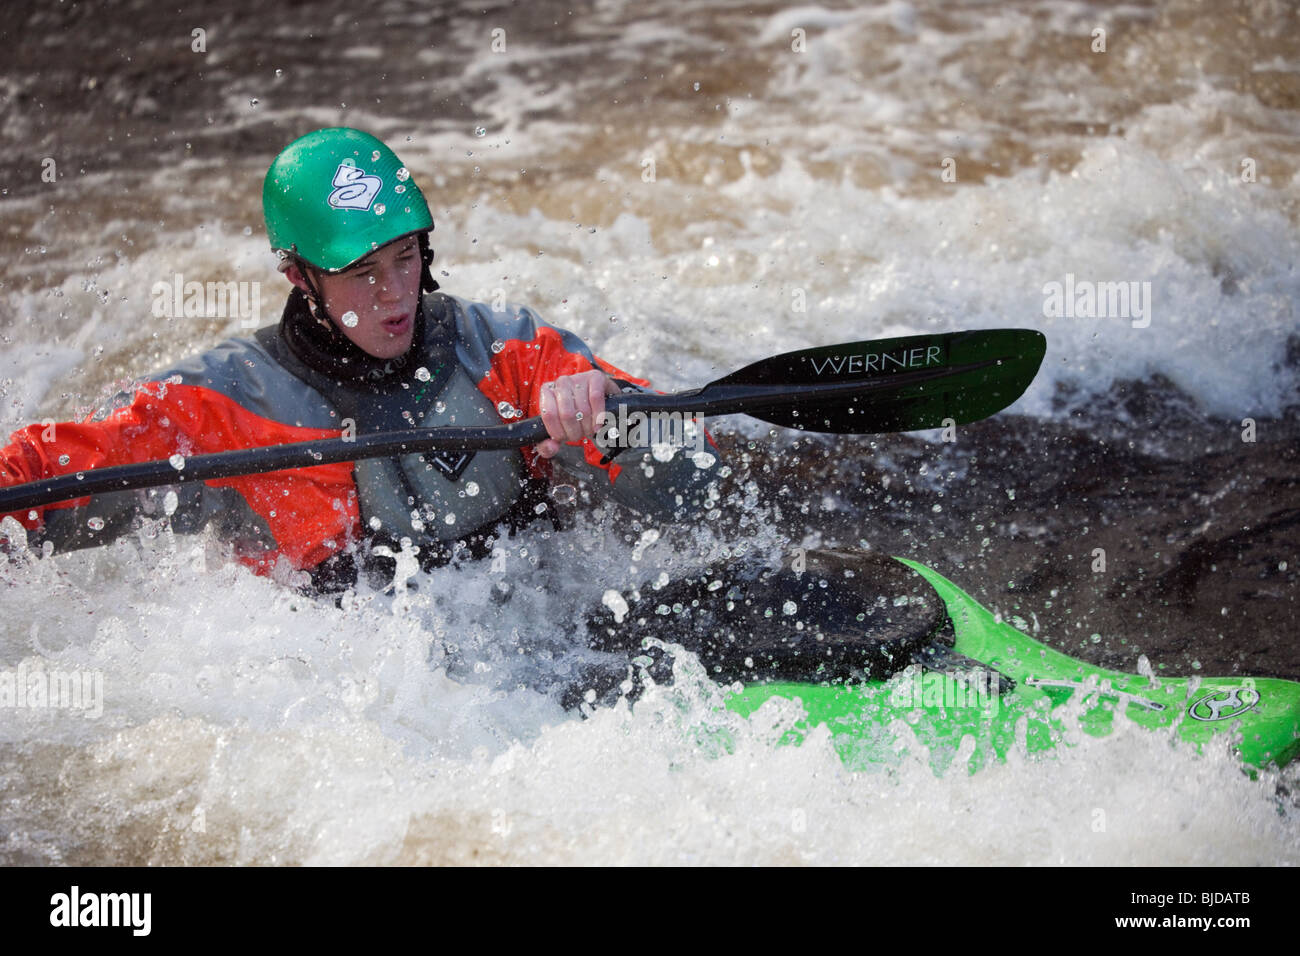 National Whitewater Centre, Frongoch, Gwynedd, North Wales, UK. Kayaker kayaking in white water on Tryweryn River. Stock Photo